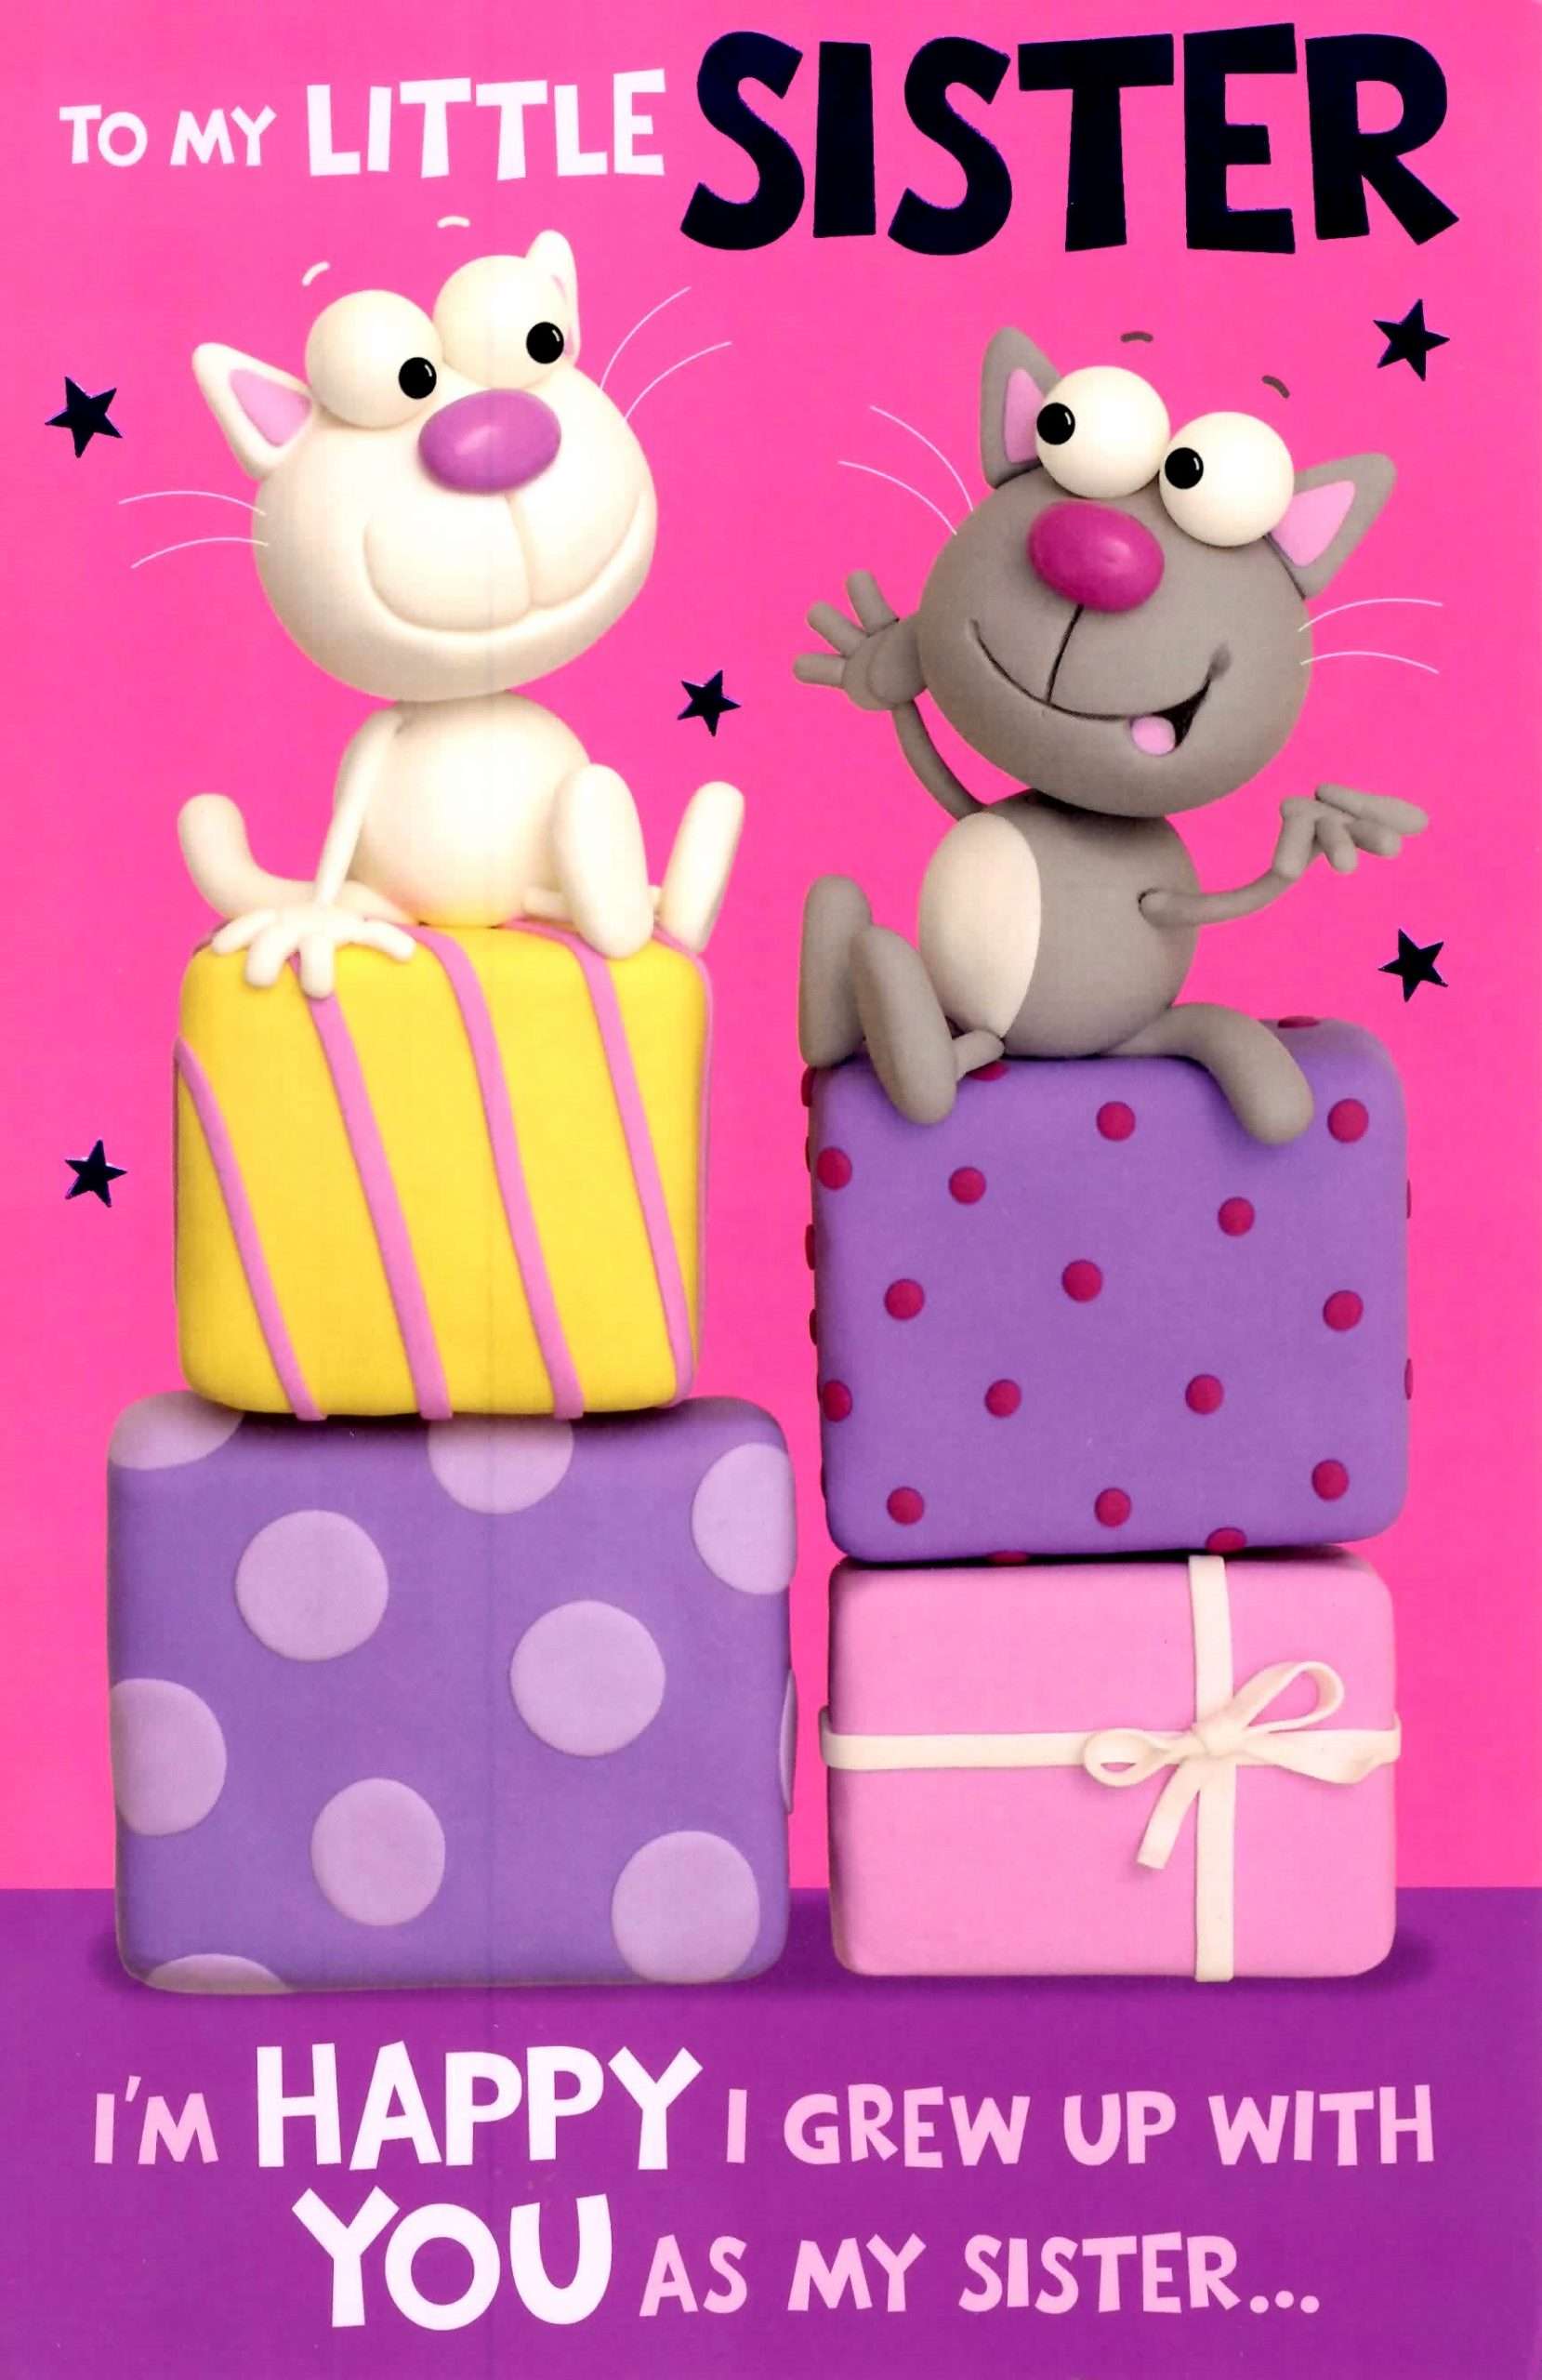 Cute Funny Little Sister Birthday Greeting Card Crackers ...